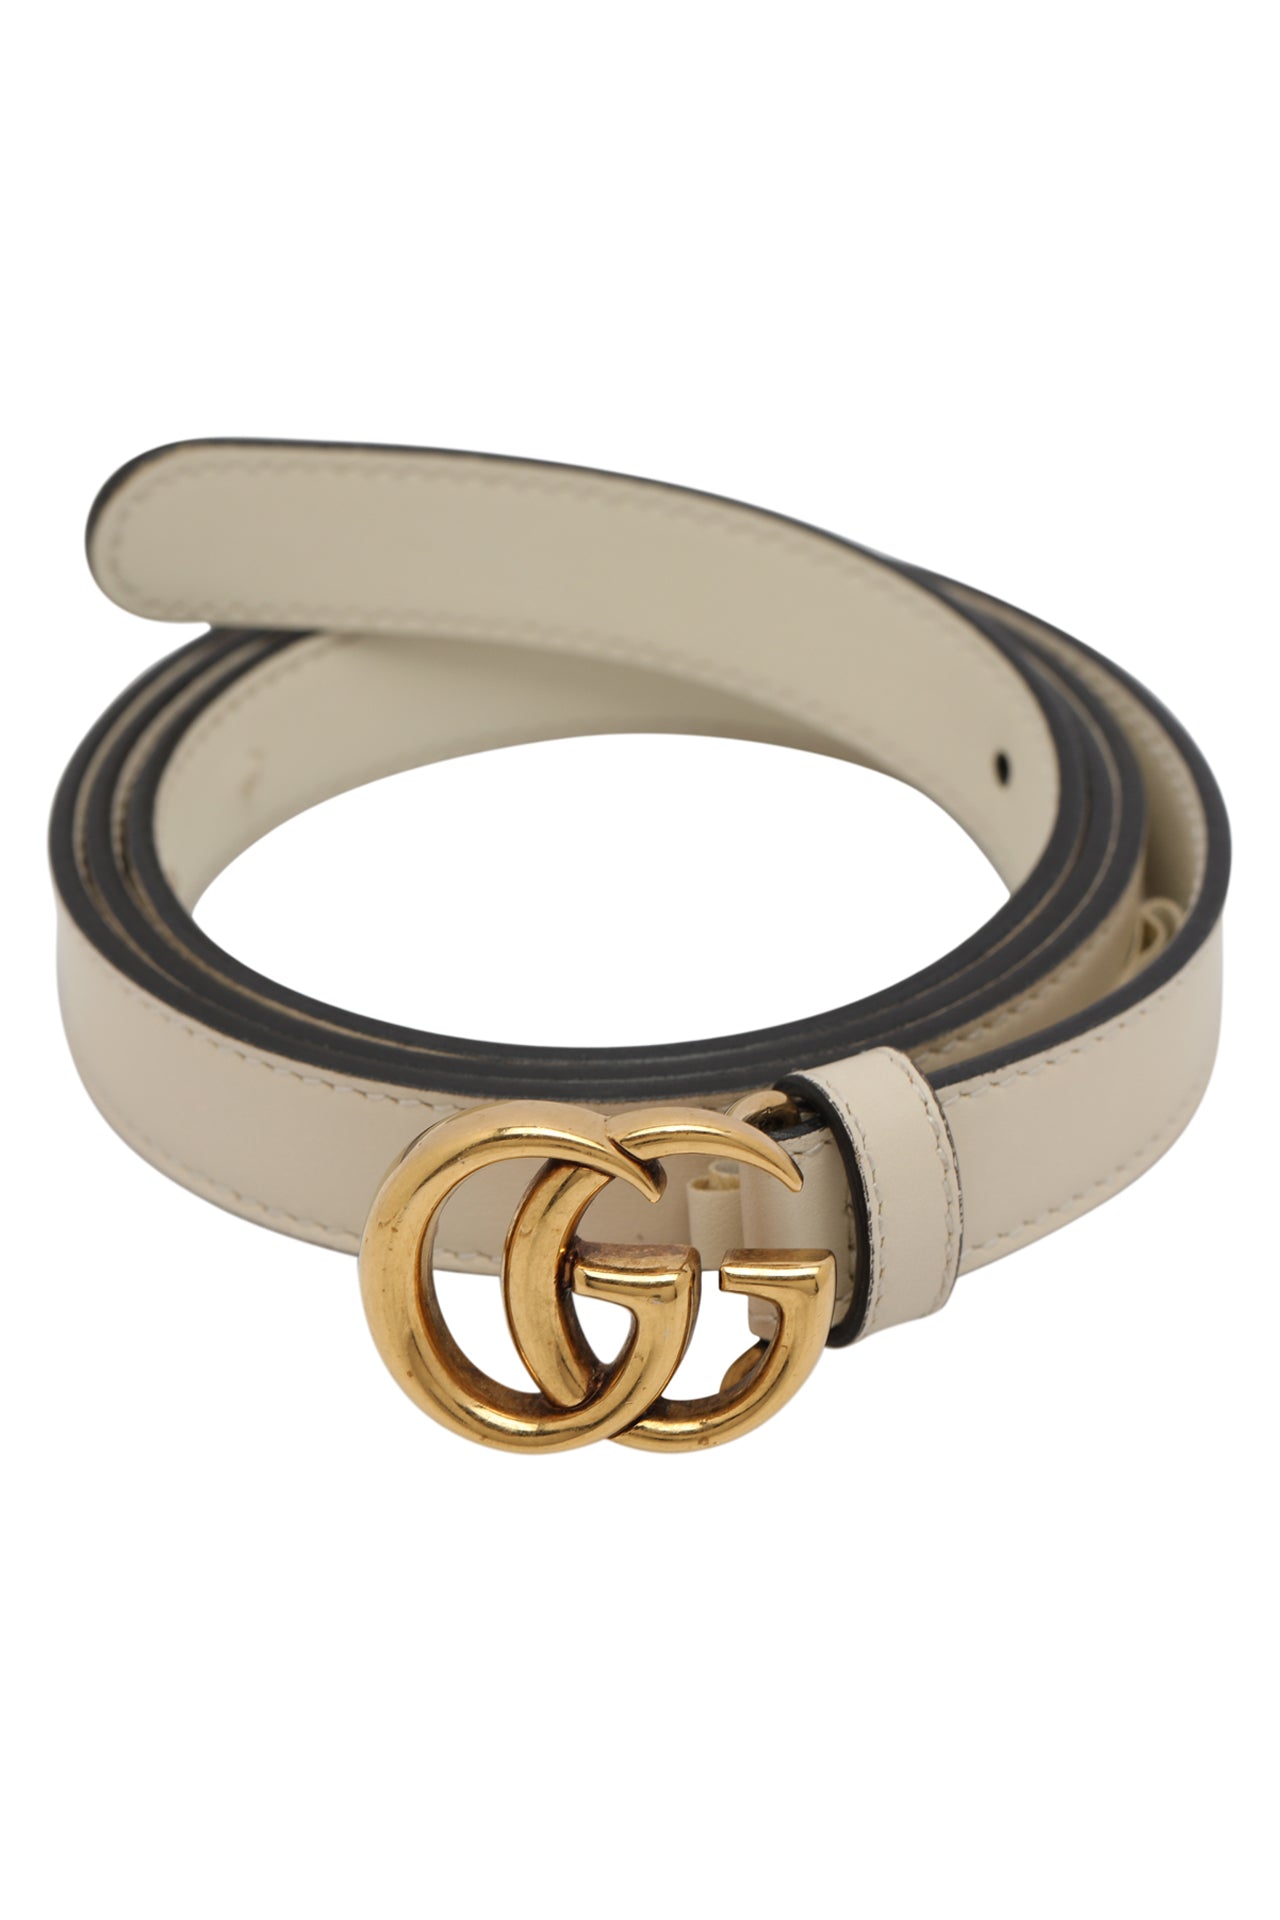 Gucci Double G Slim Leather Belt